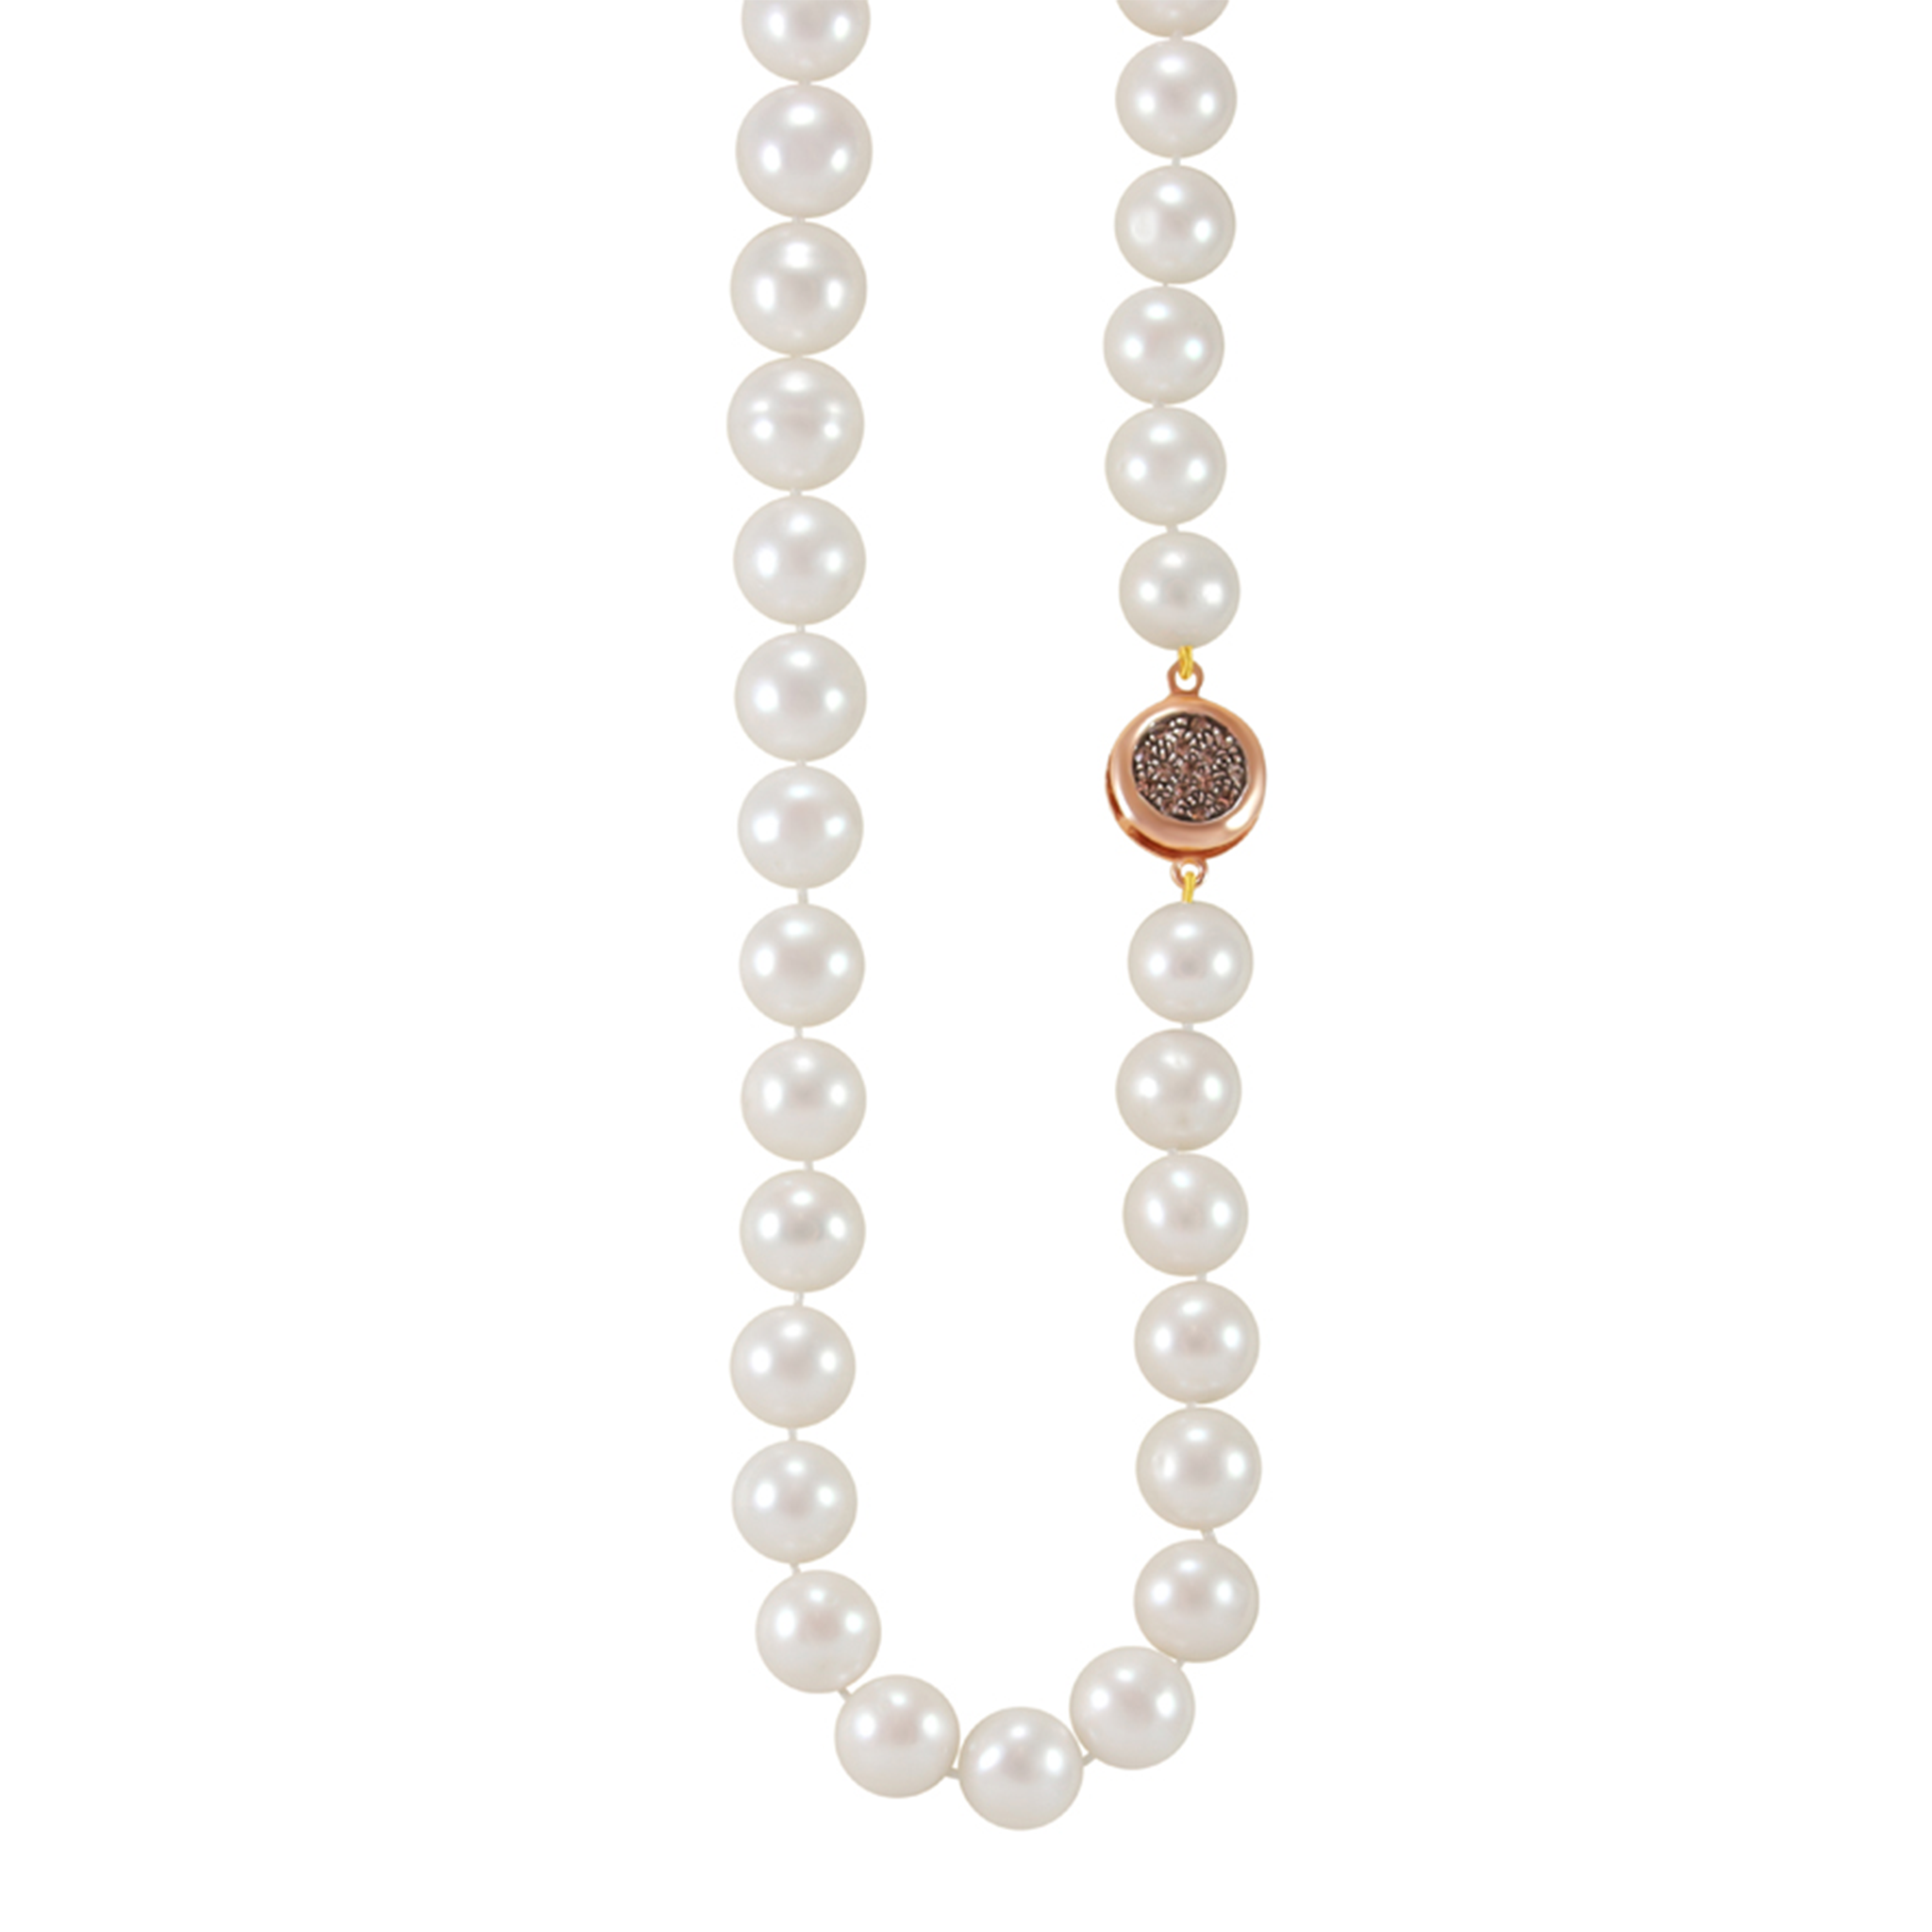 12-15mm Graduated White Pearl Necklace 19" with Fume Clasp